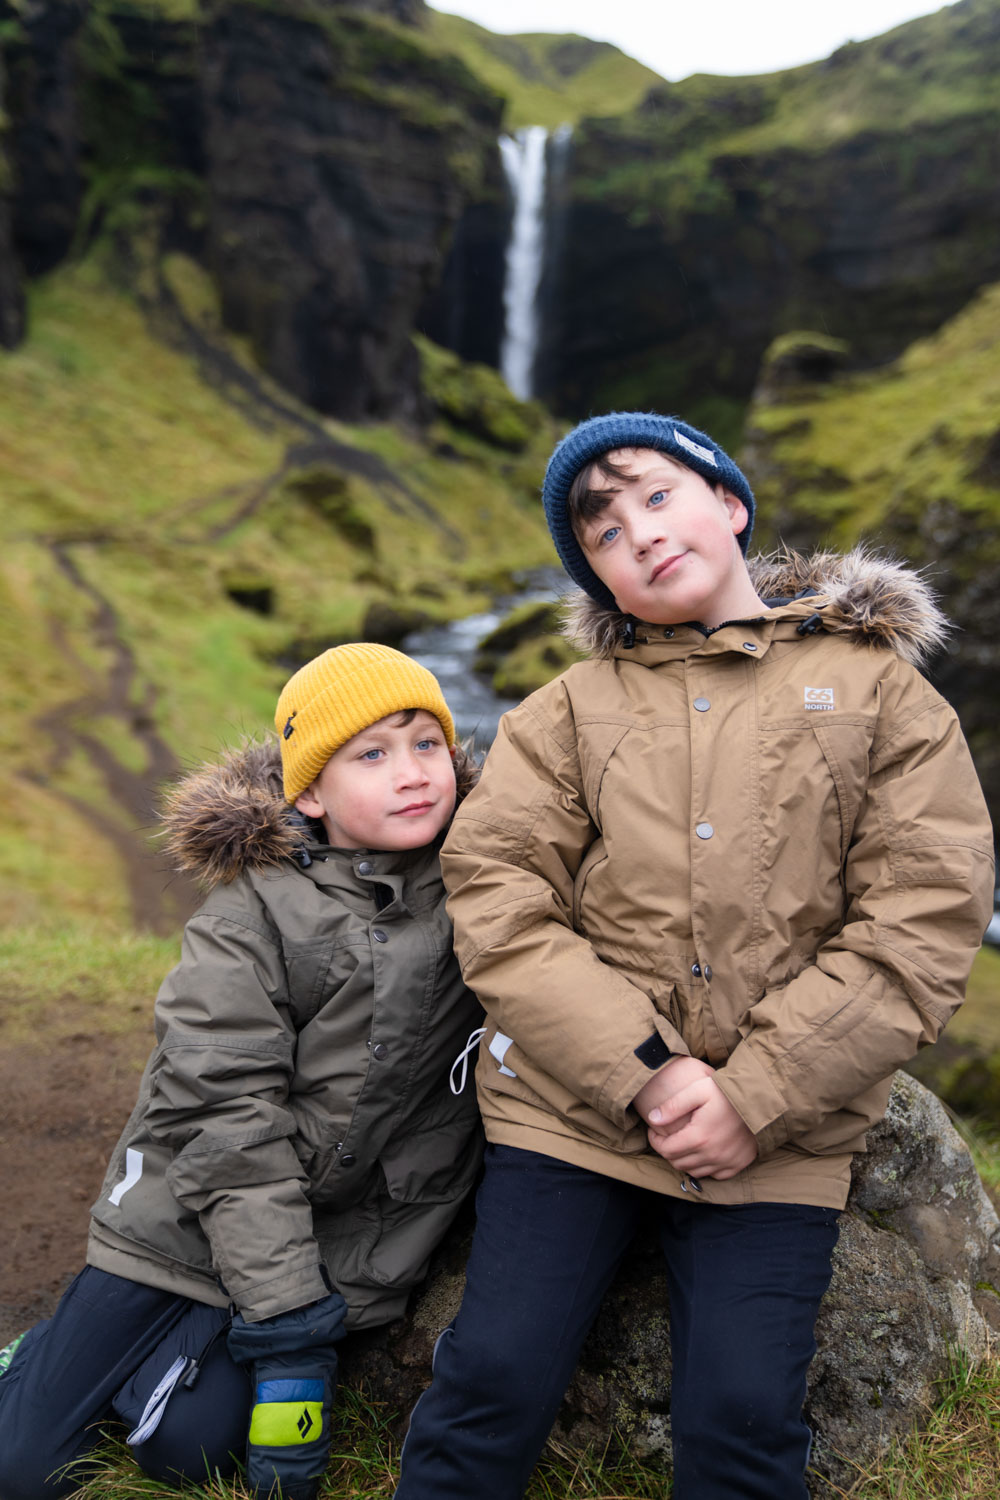 Chris Burkard's sons, Forrest and Jeremiah, at Kvernufoss waterfall